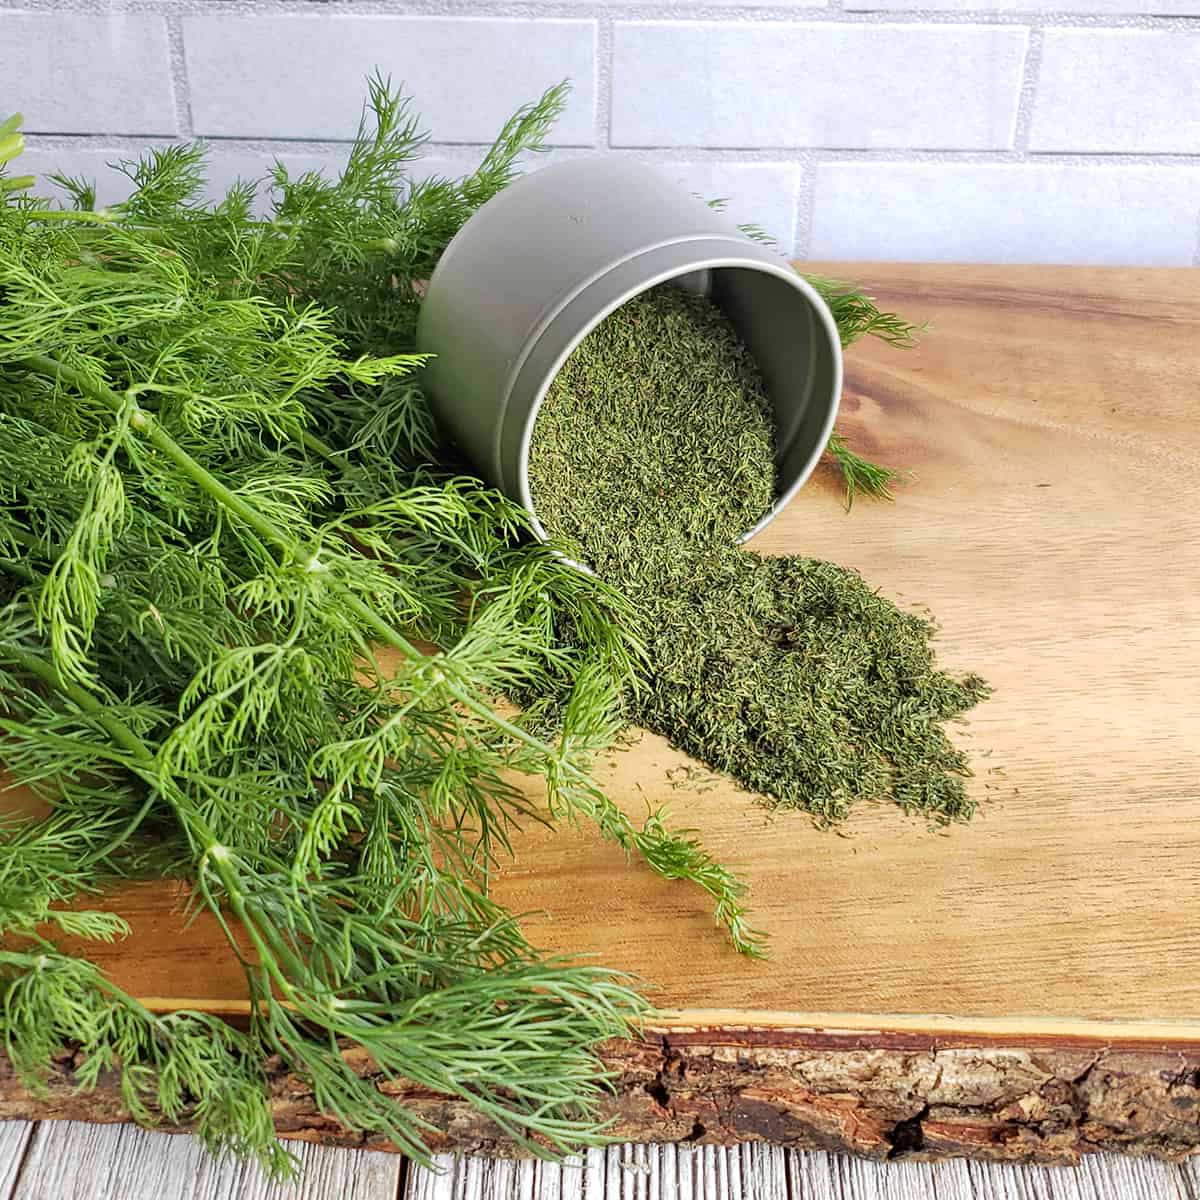 How to Dehydrate Dill Weed - The Purposeful Pantry